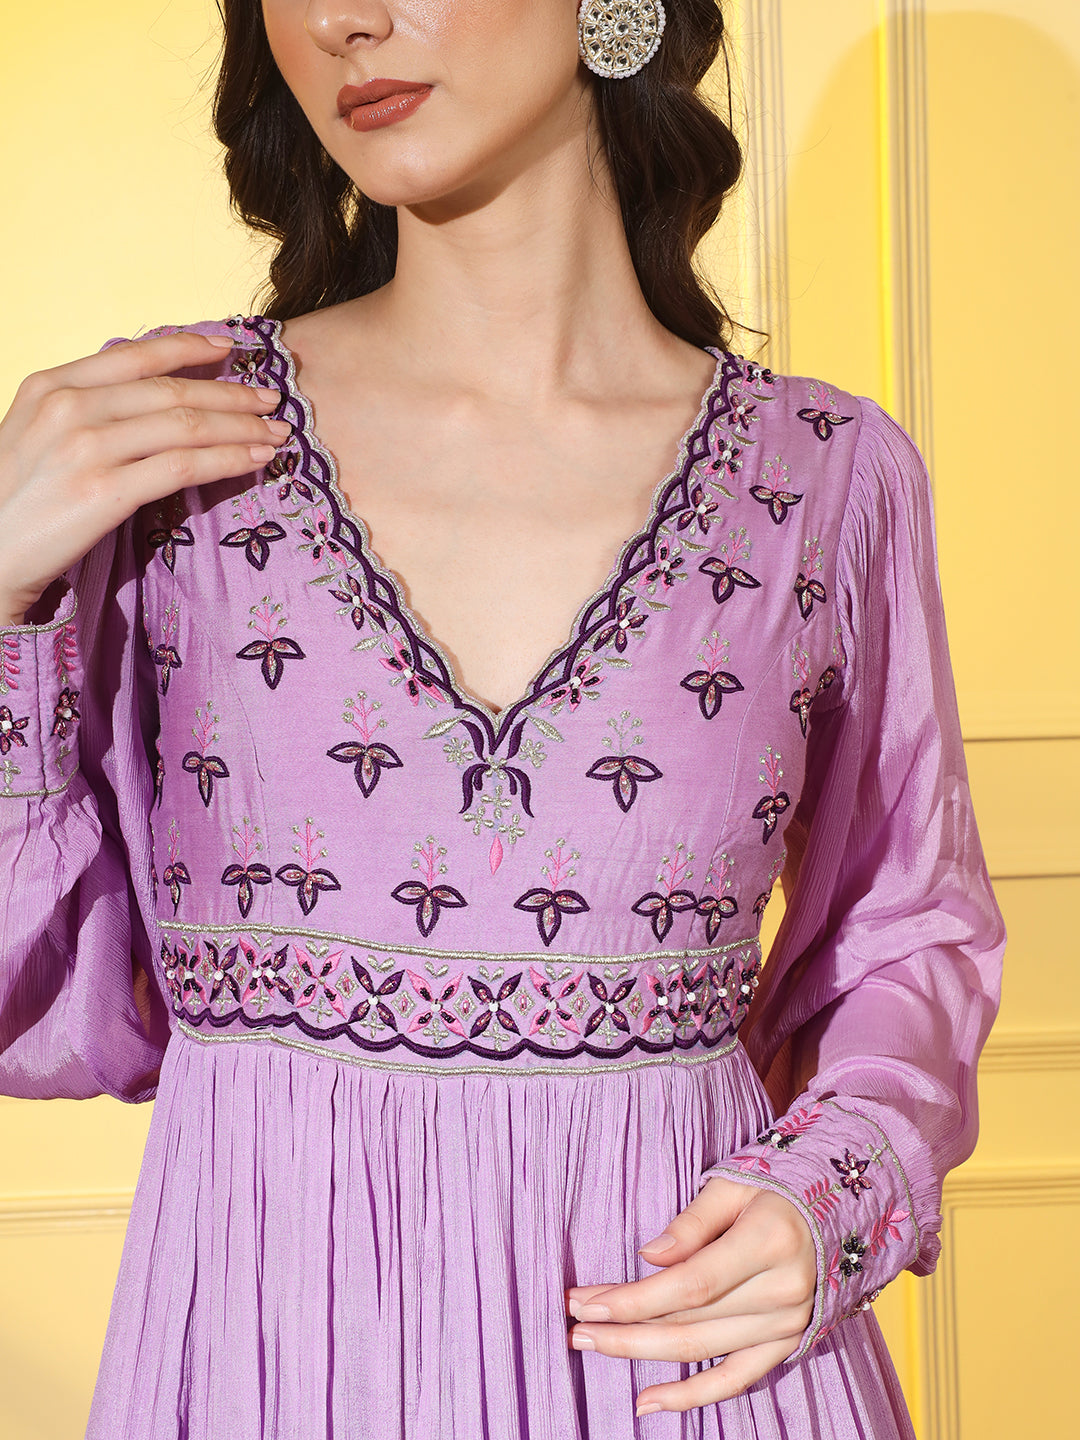 Elegant Mauve Embroidered Anarkali with Matching Embroidered Dupatta | Hues of India